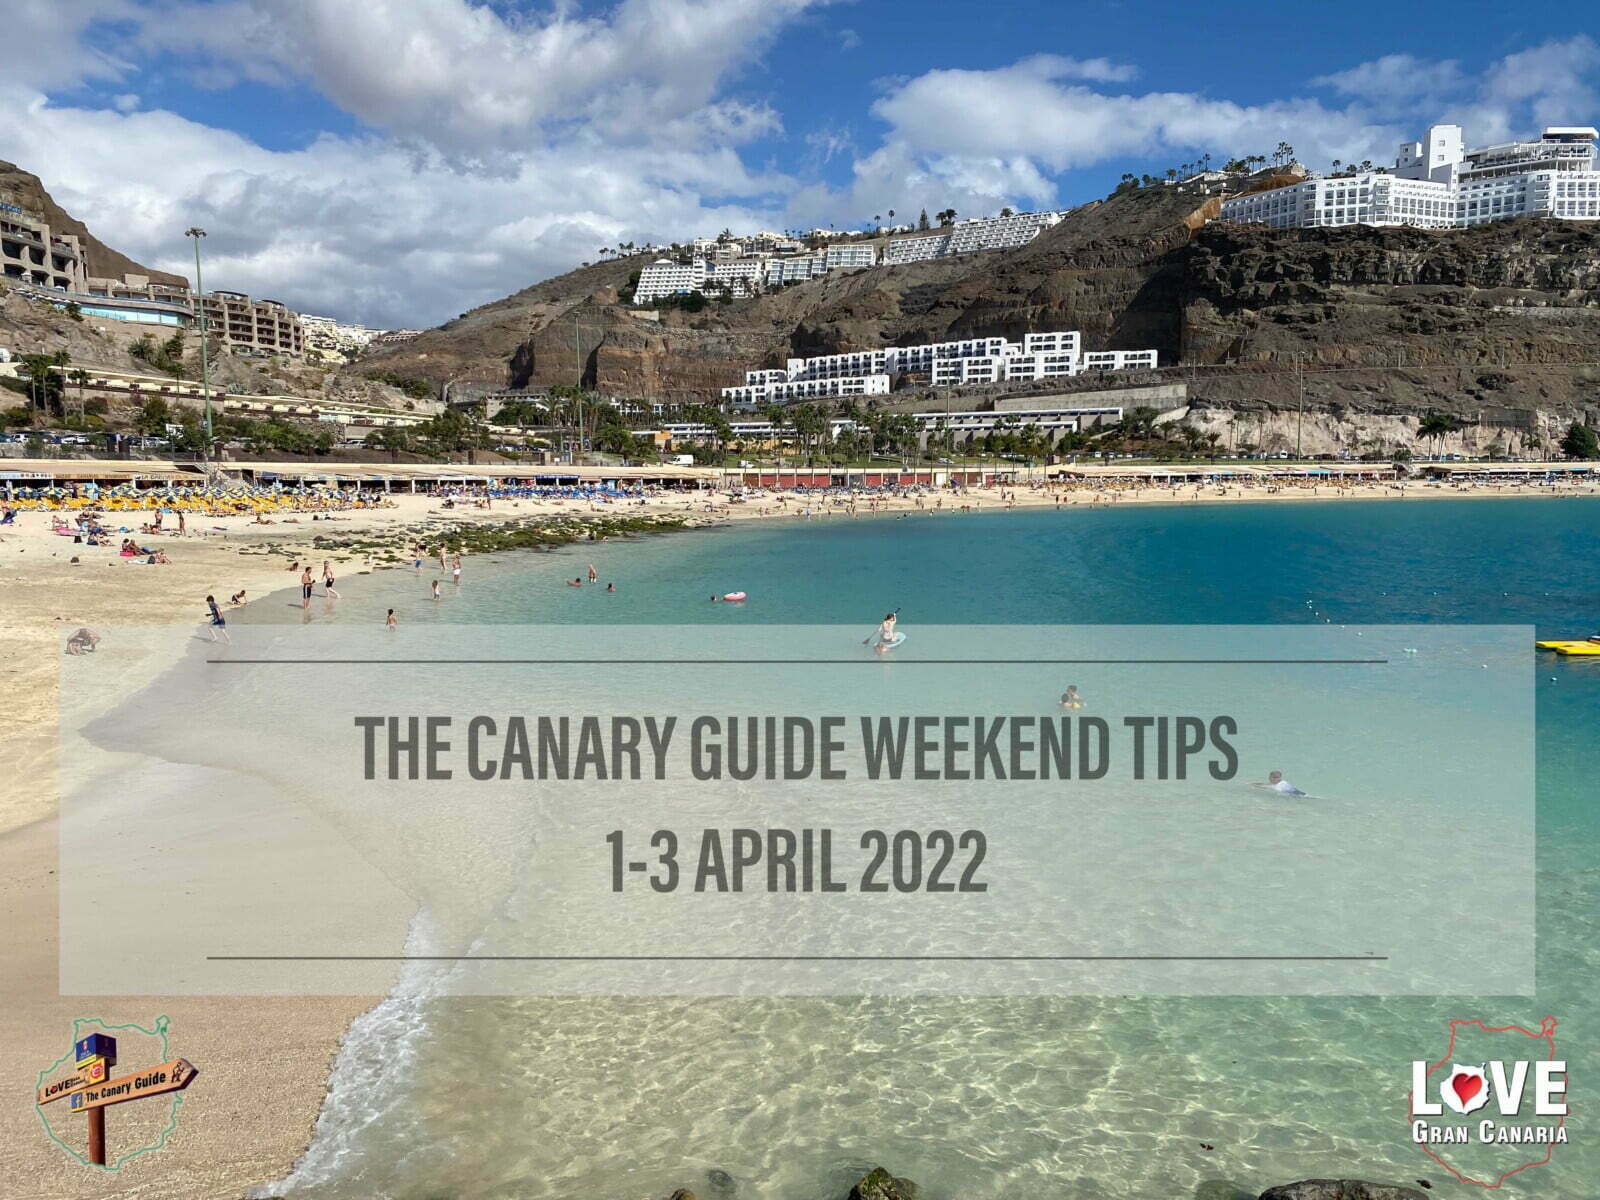 The Canary Guide Weekend Tips 1-3 April 2022